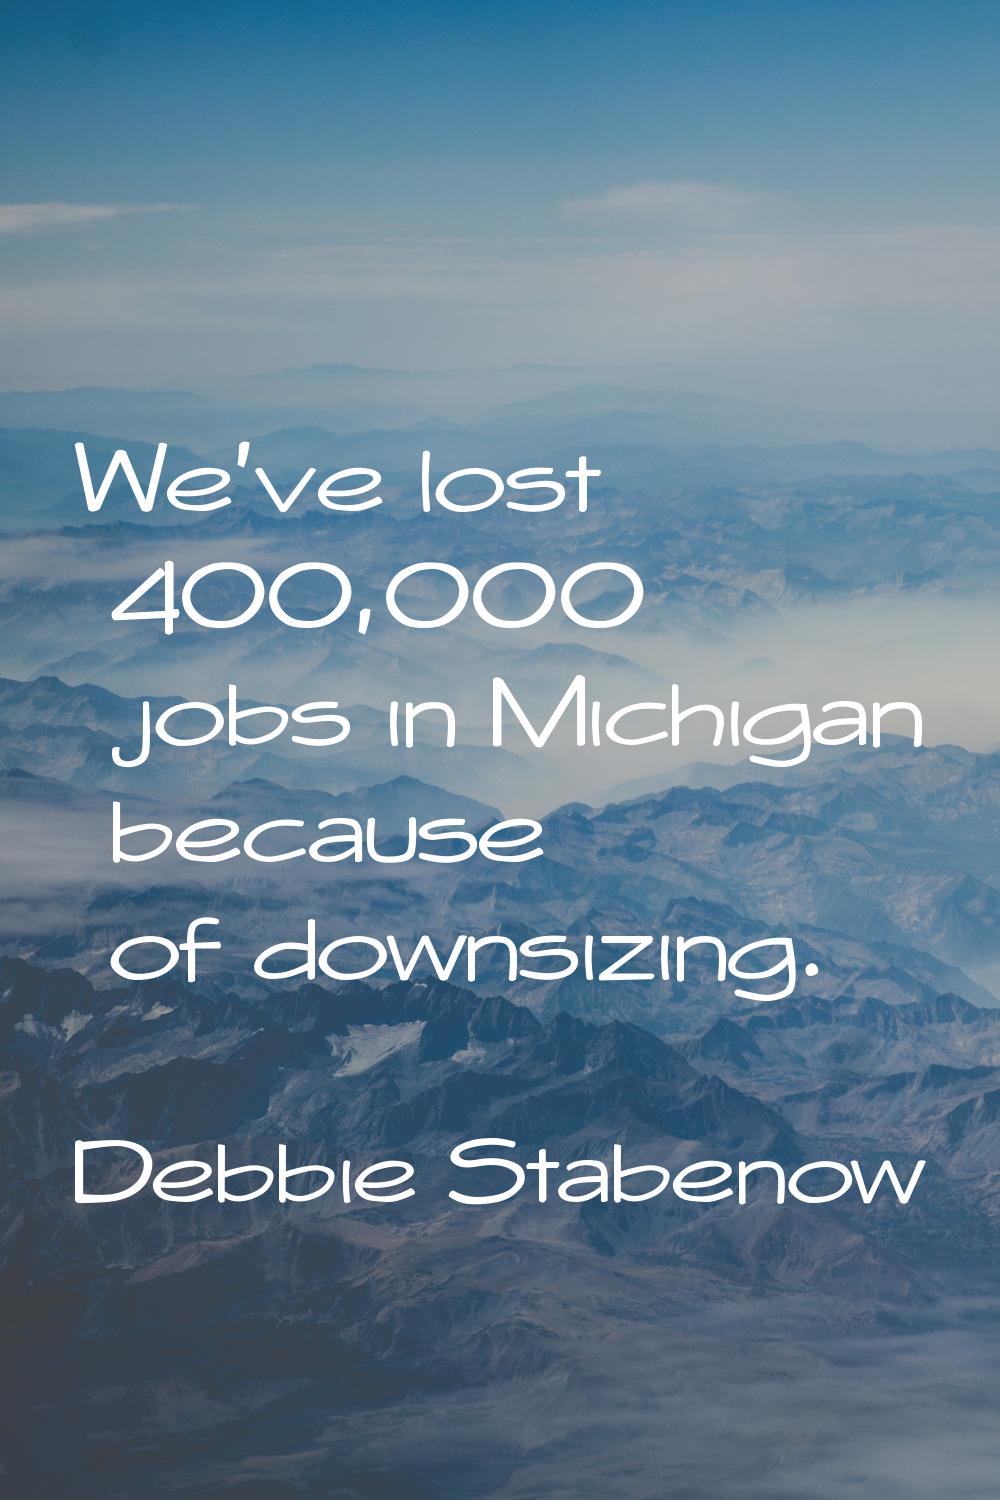 We've lost 400,000 jobs in Michigan because of downsizing.